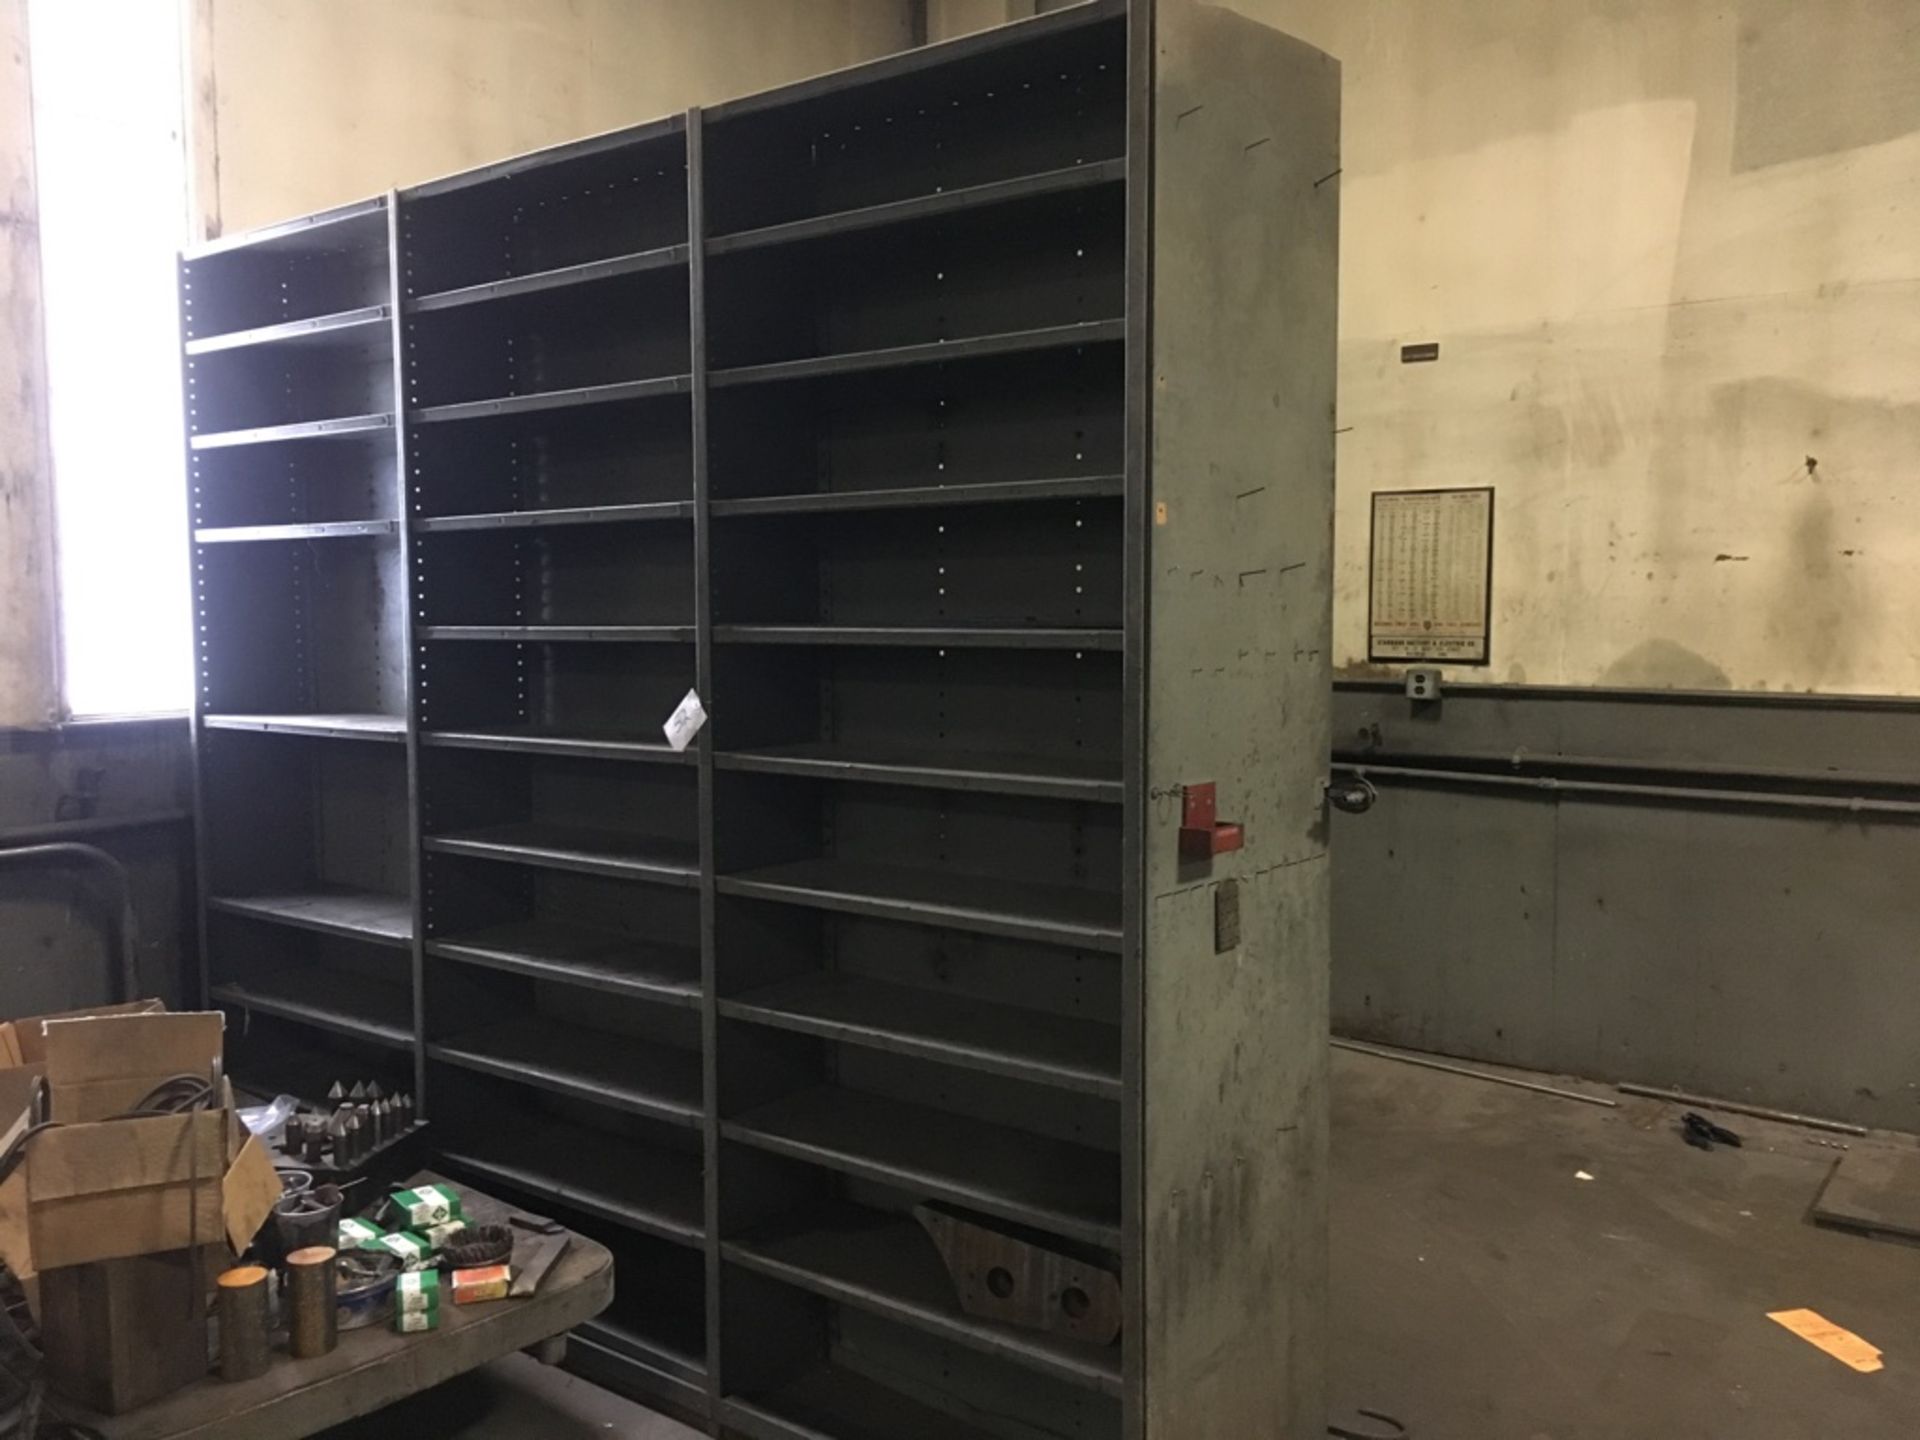 One section of parts storage shelving